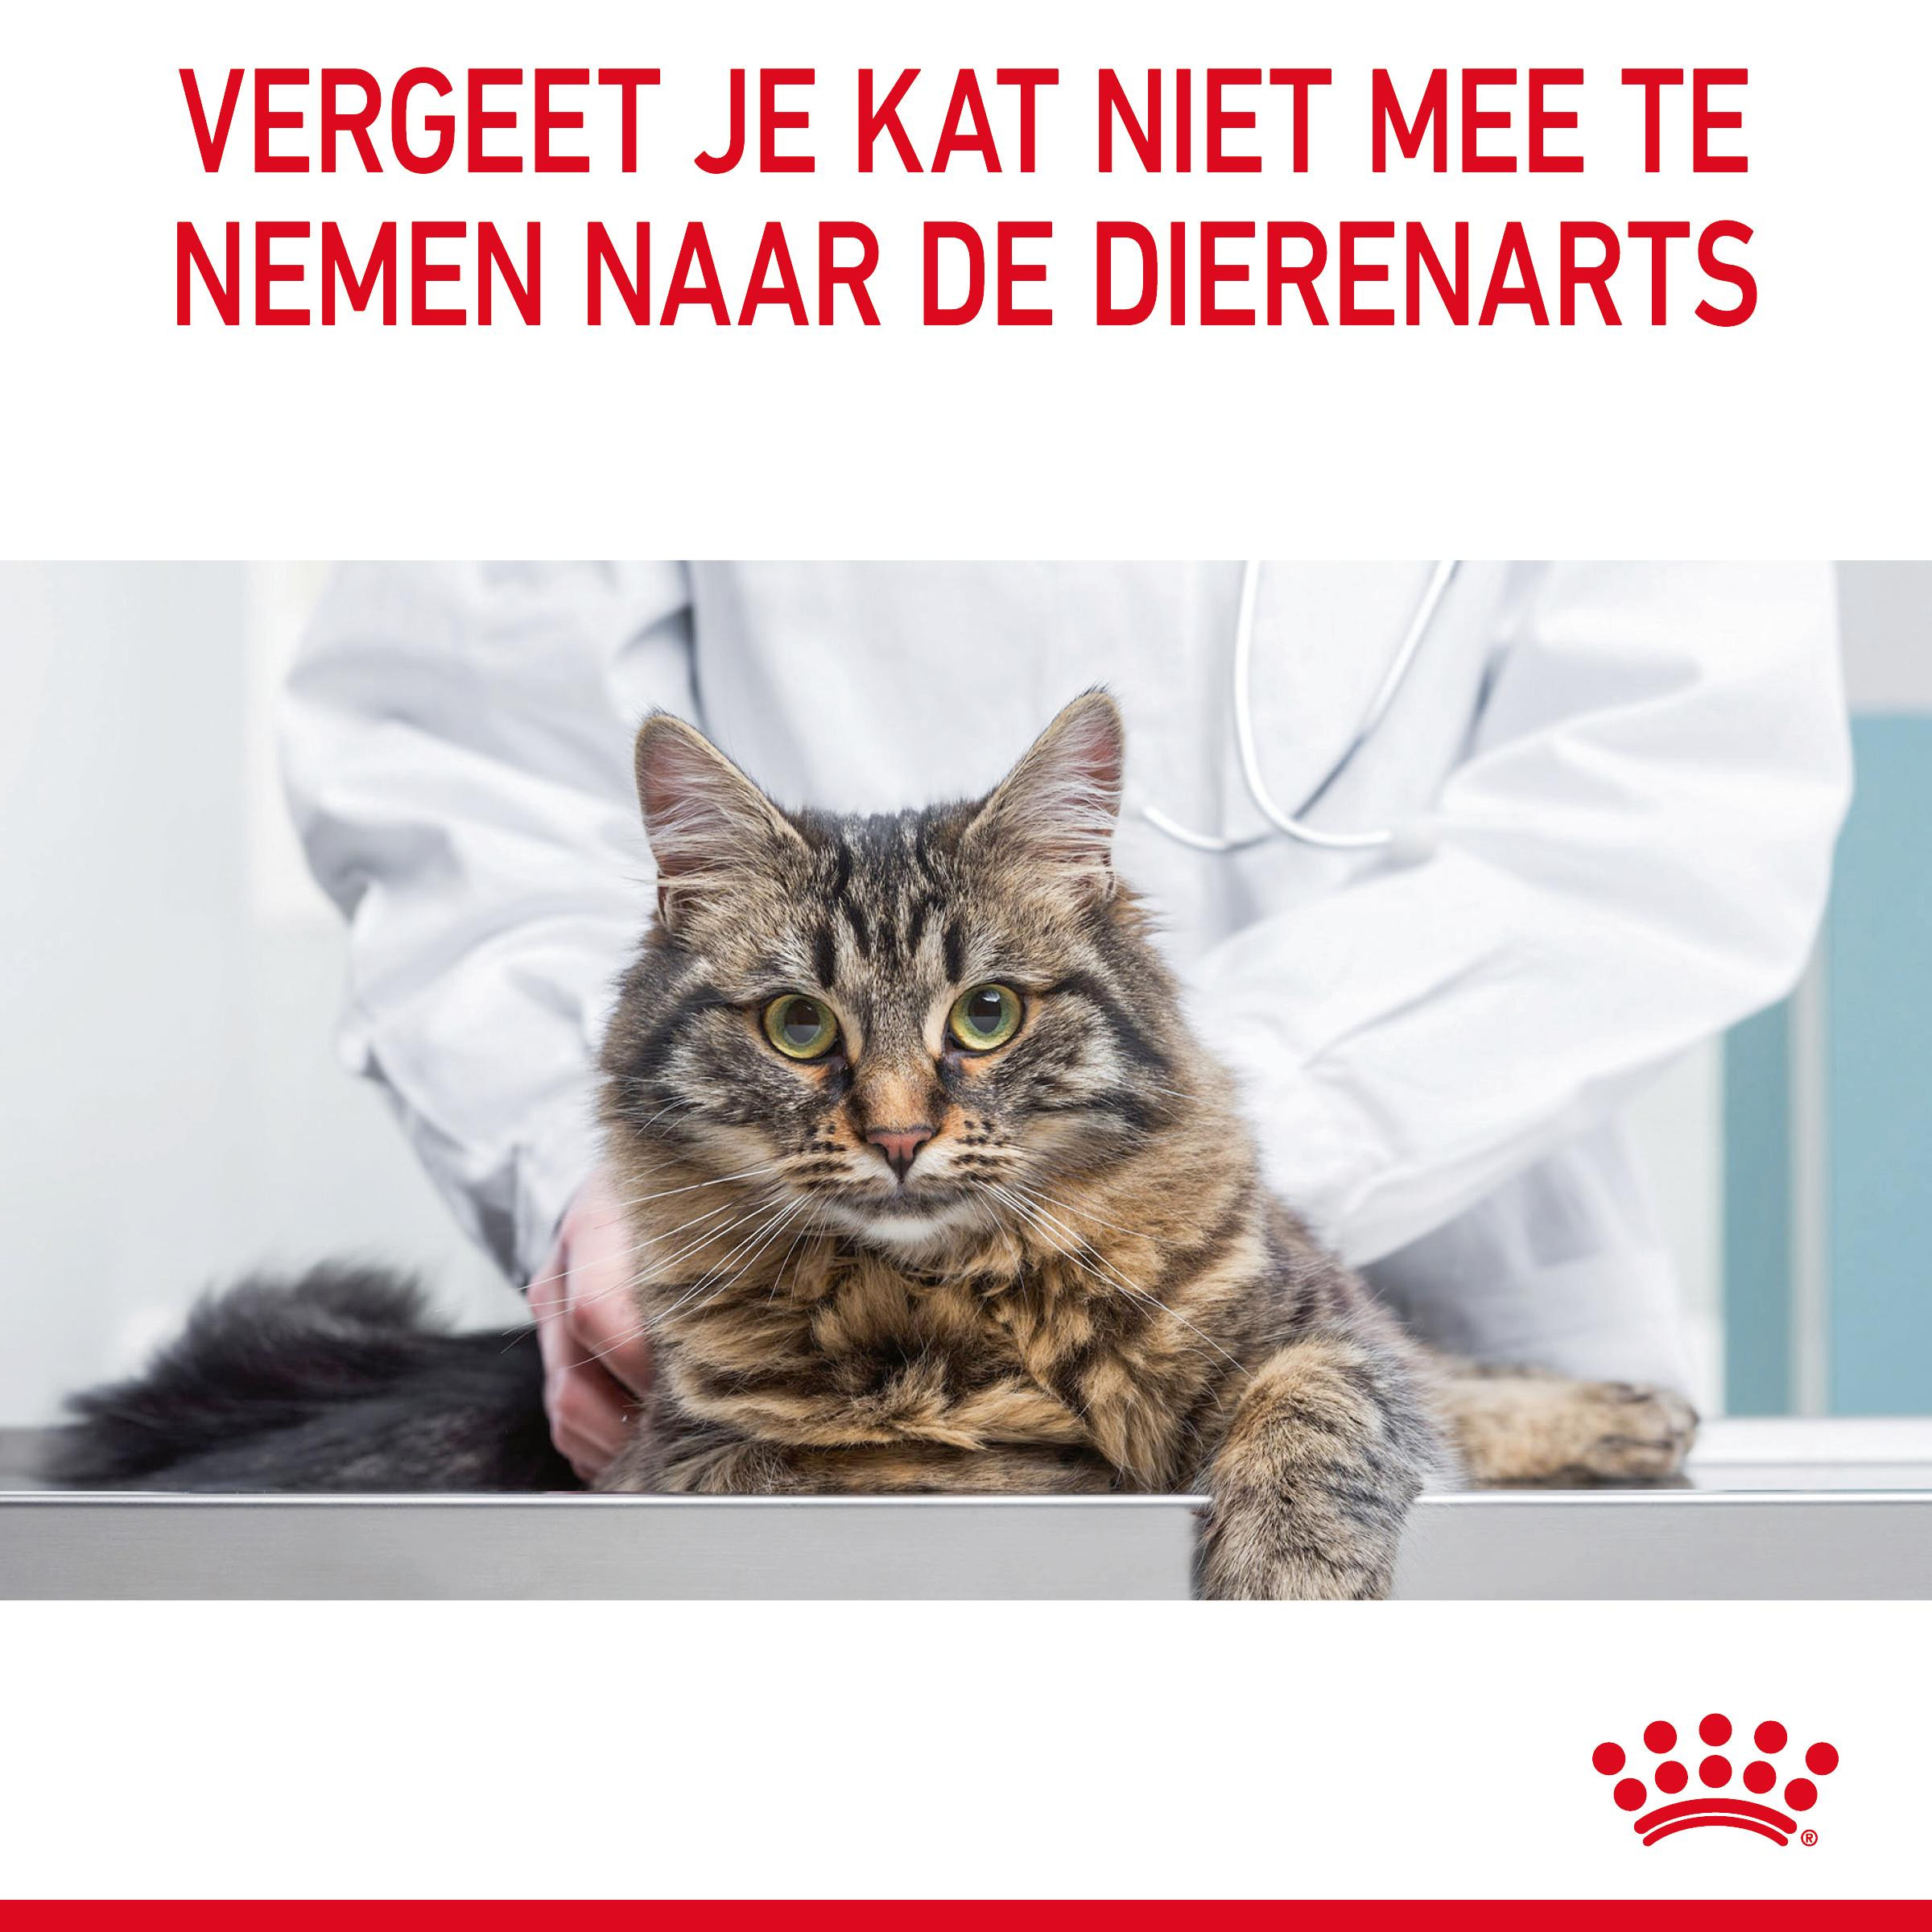 Royal Canin Light Weight Care in jelly natvoer kat (85 g)